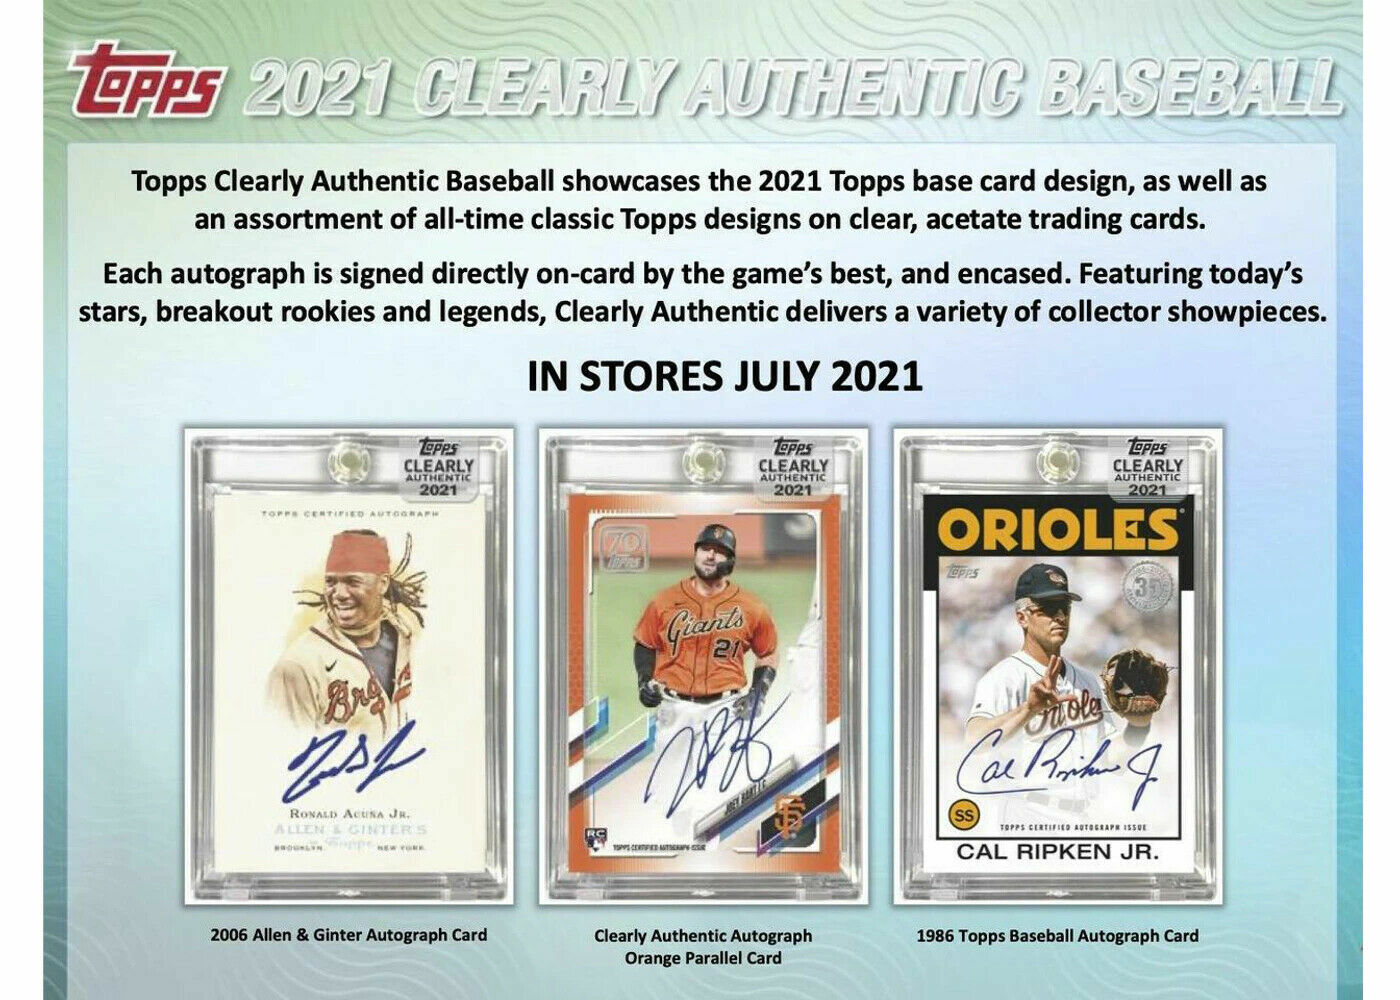 NEW YORK METS 2021 TOPPS CLEARLY AUTHENTIC BASEBALL 1/2 CASE 10 BOX TEAM BREAK 1